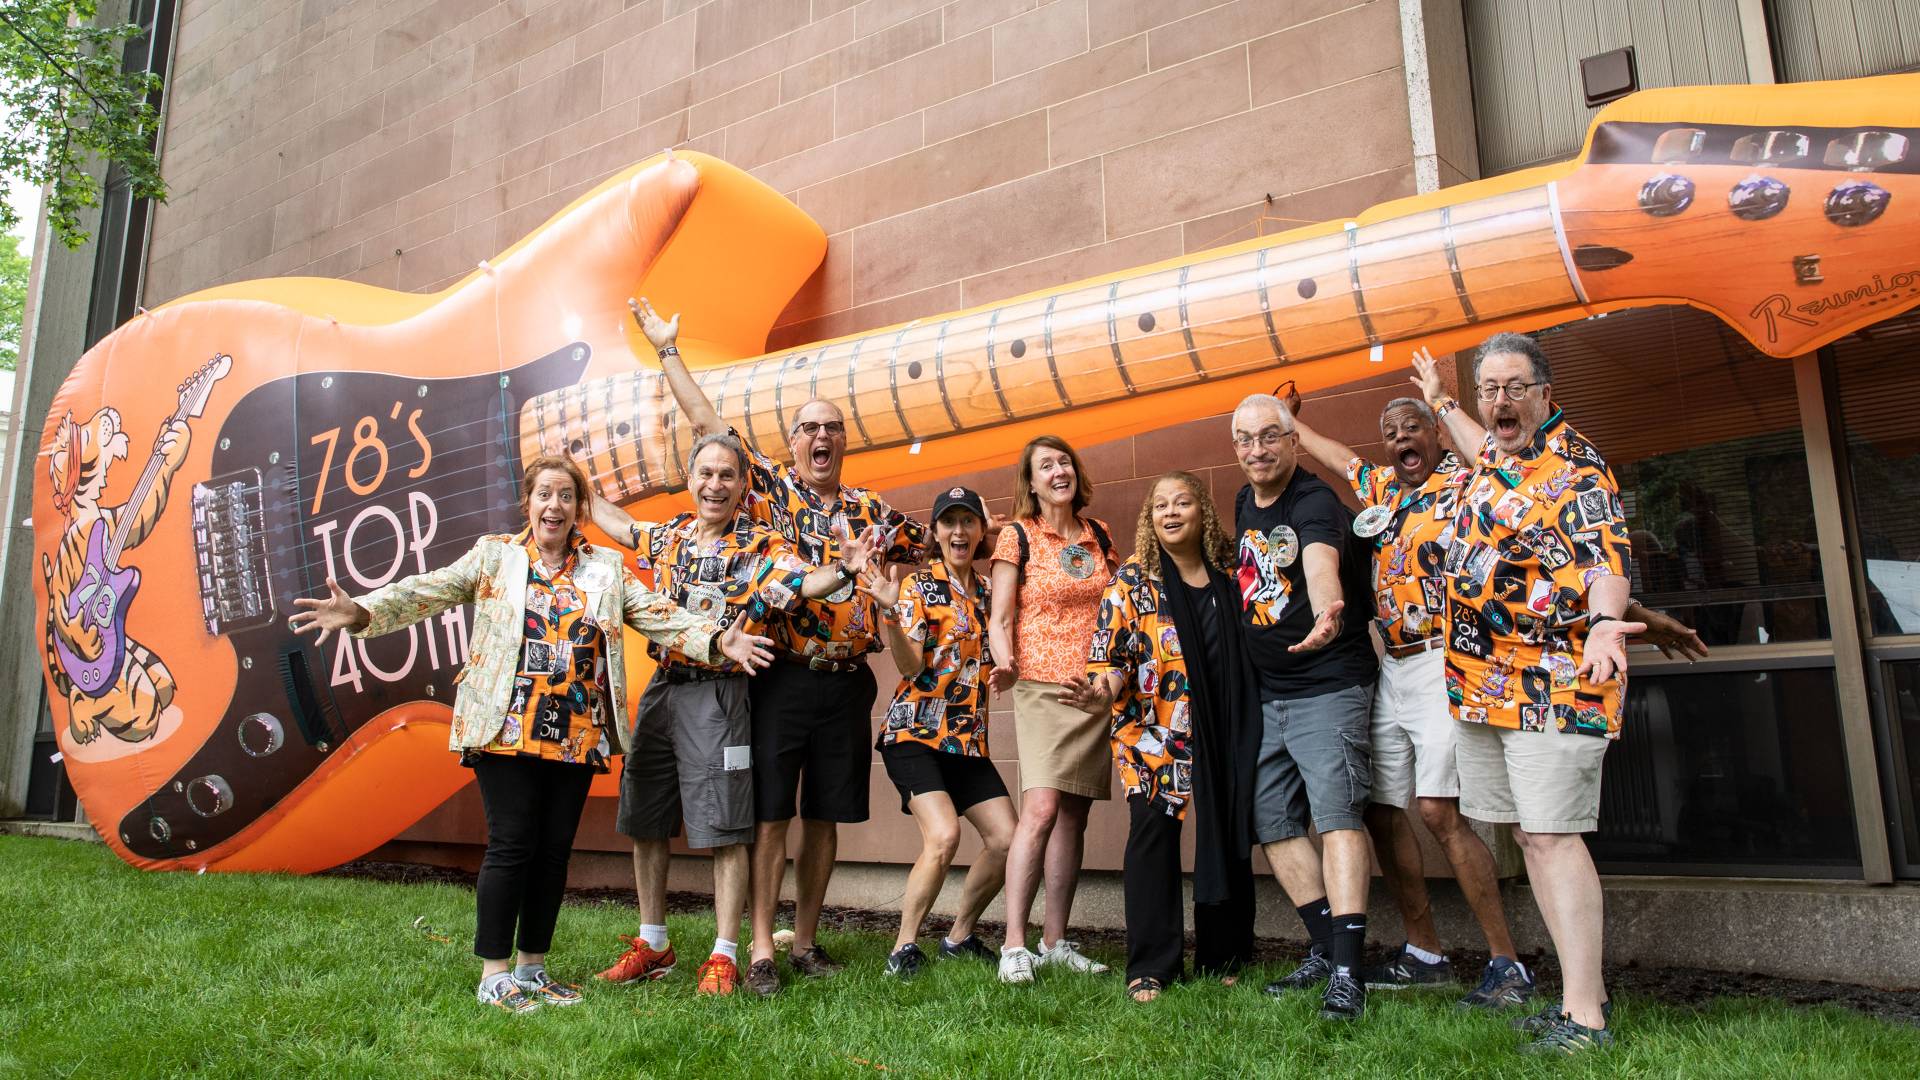 Members of Class of 1978 posing in front of giant balloon guitar